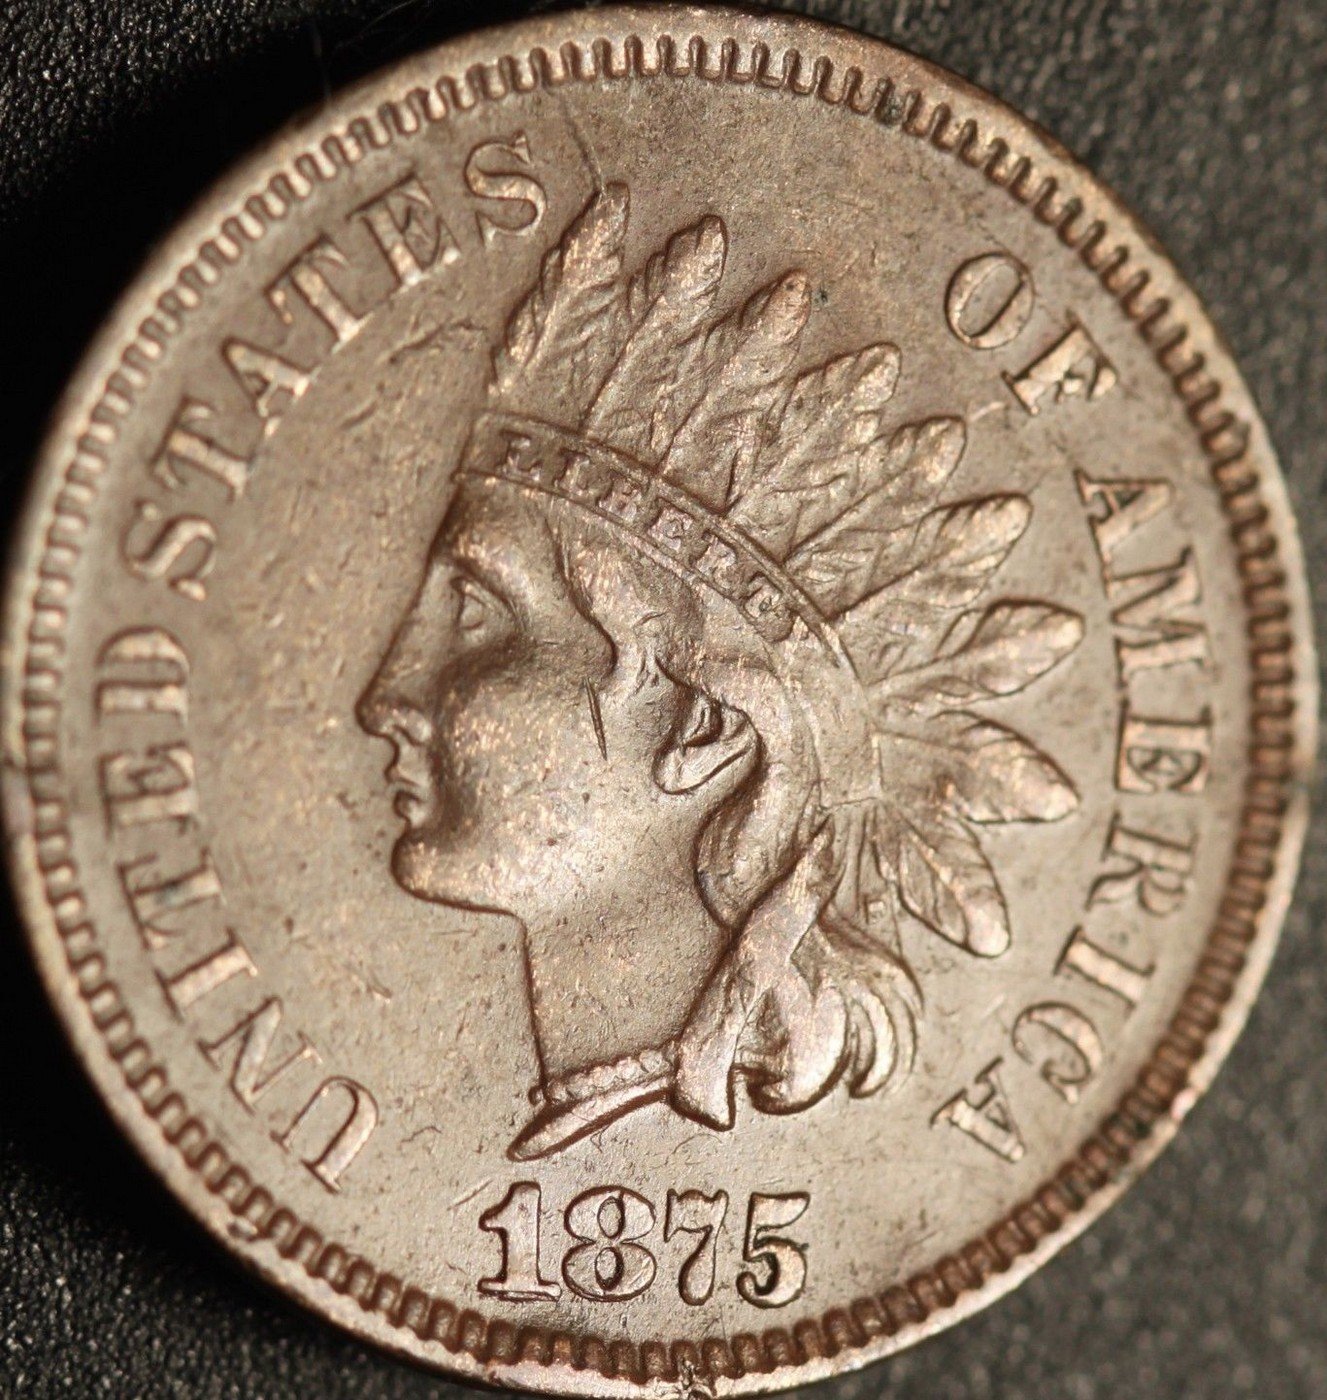 1875 RPD-004 - Indian Head Cent - Photo by Ed Nathanson